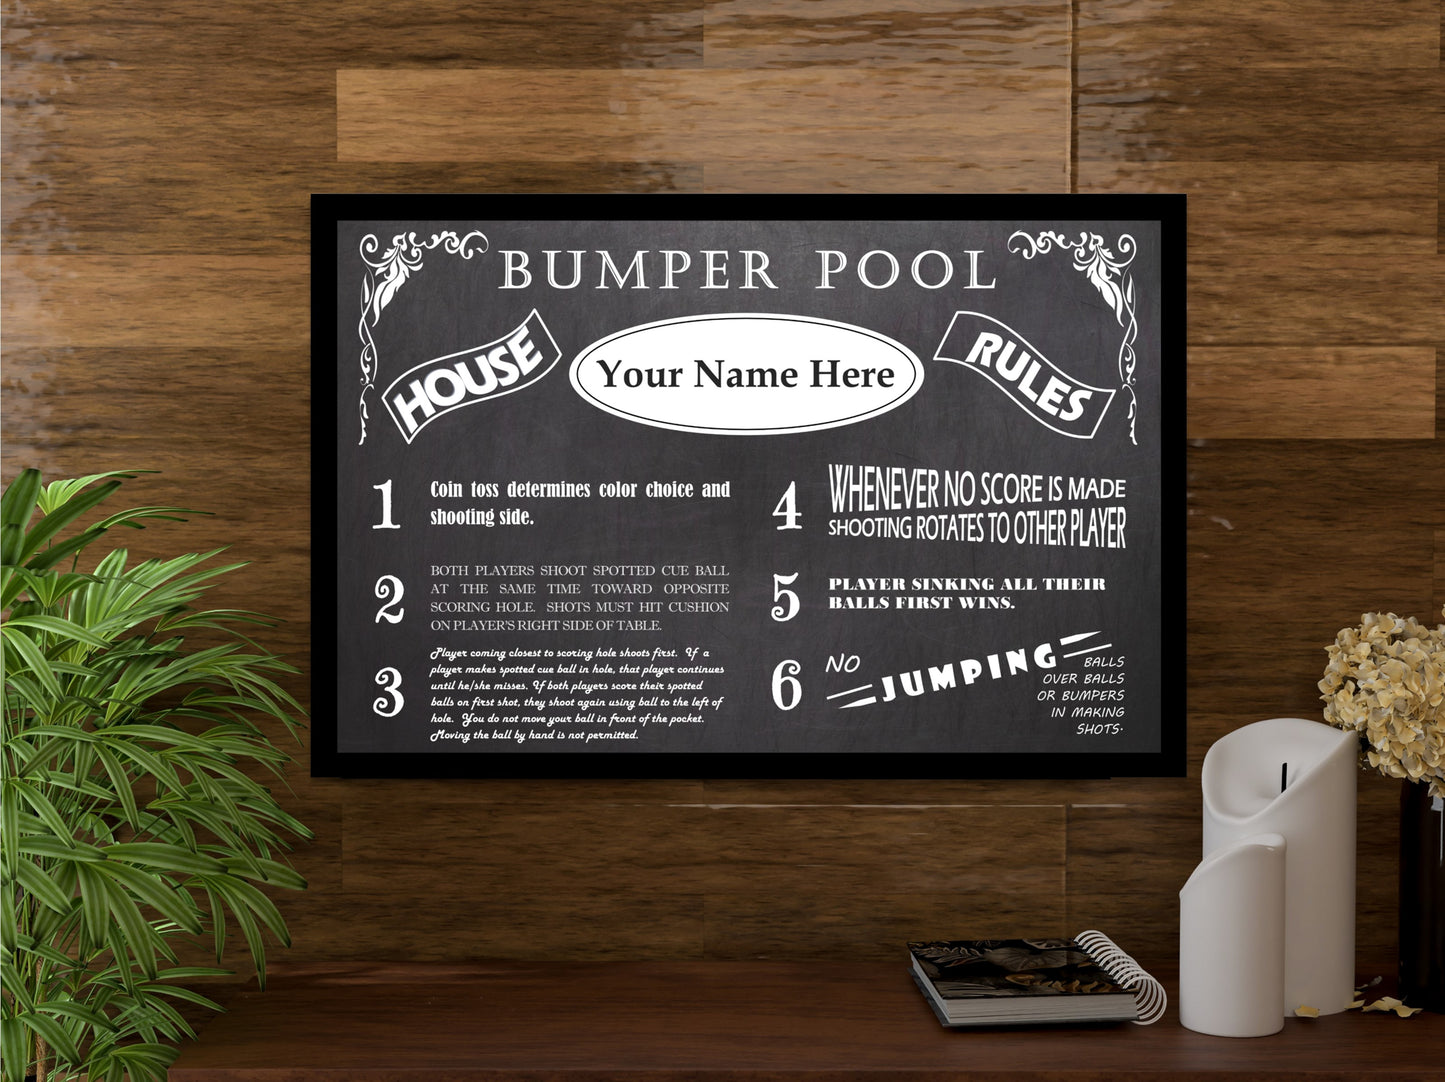 Vintage House Rules Bumper Pool Poster Personalized and Customized With Your Name!